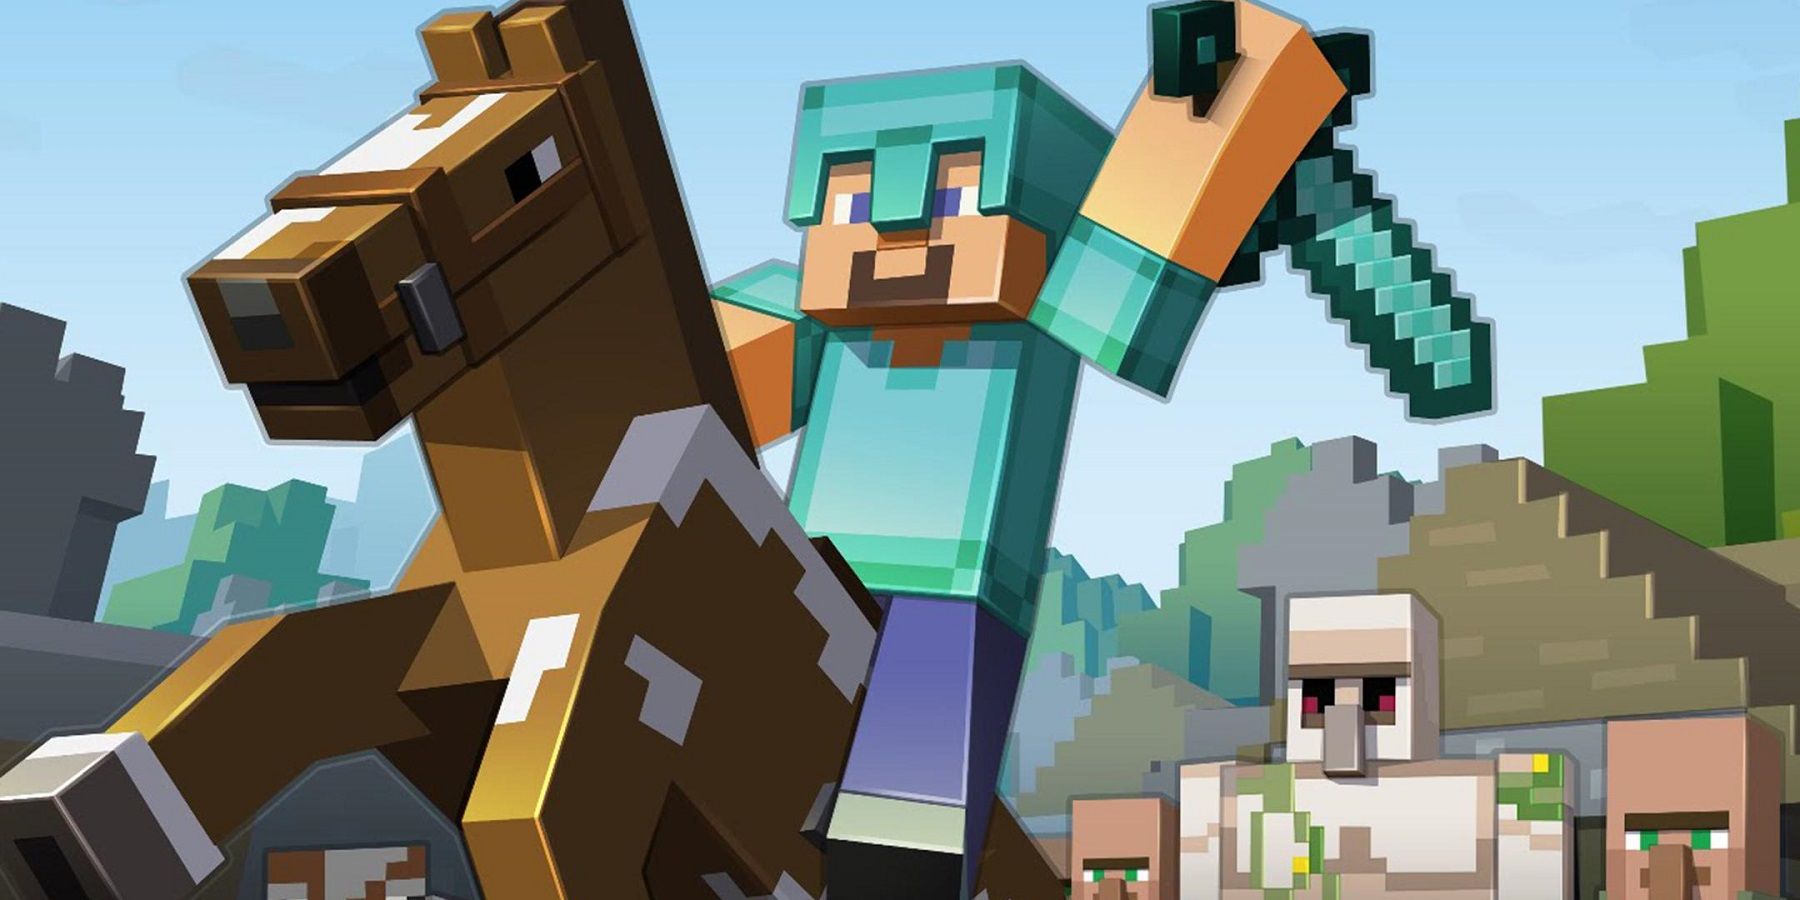 Image from Minecraft showing Steve holding a sword as he rides on a horse.